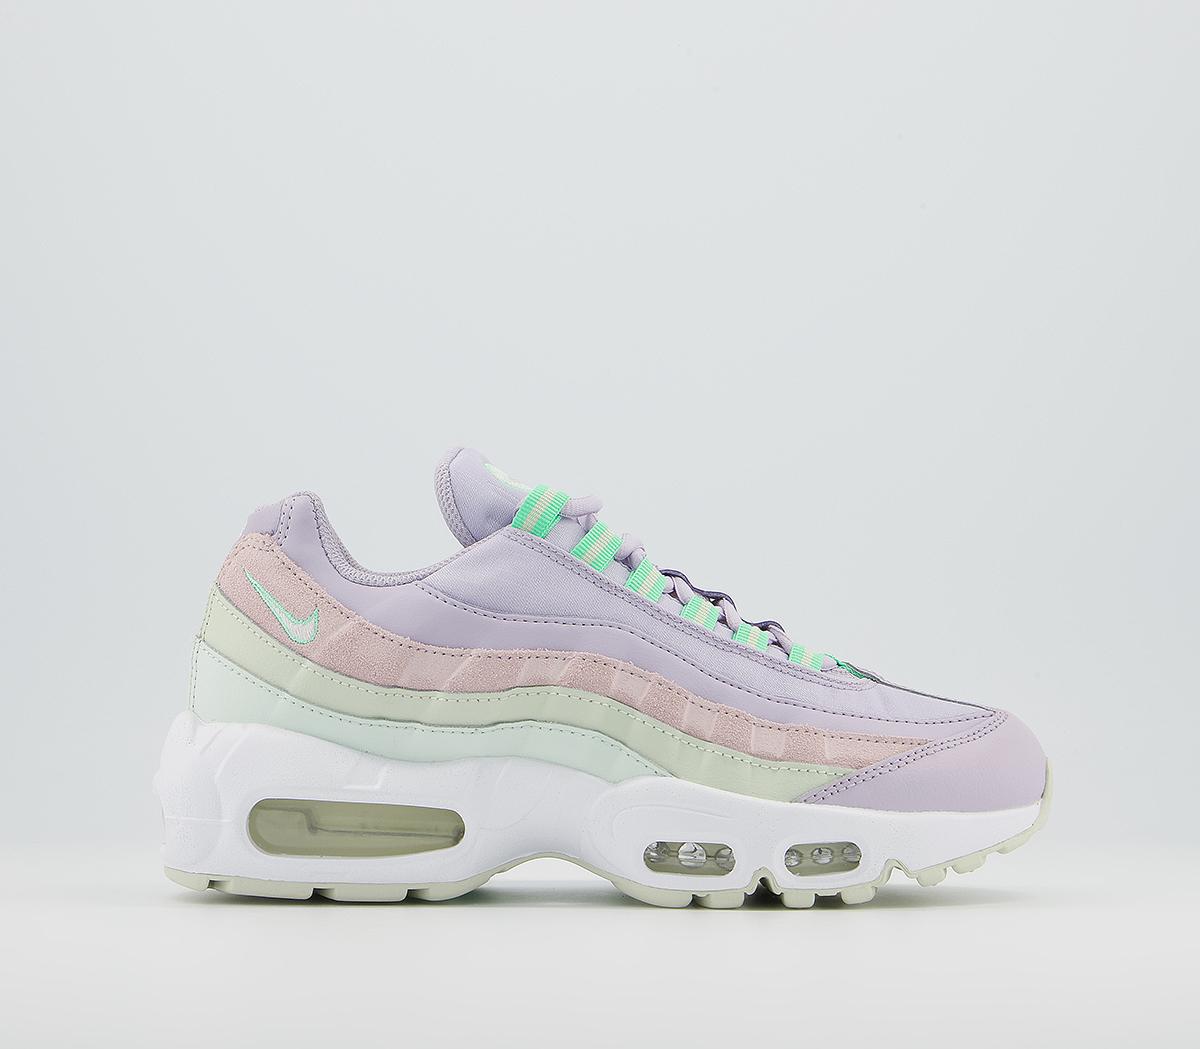 NikeAir Max 95 TrainersInfinite Lilac White Sea Glass Green Barely Rose G